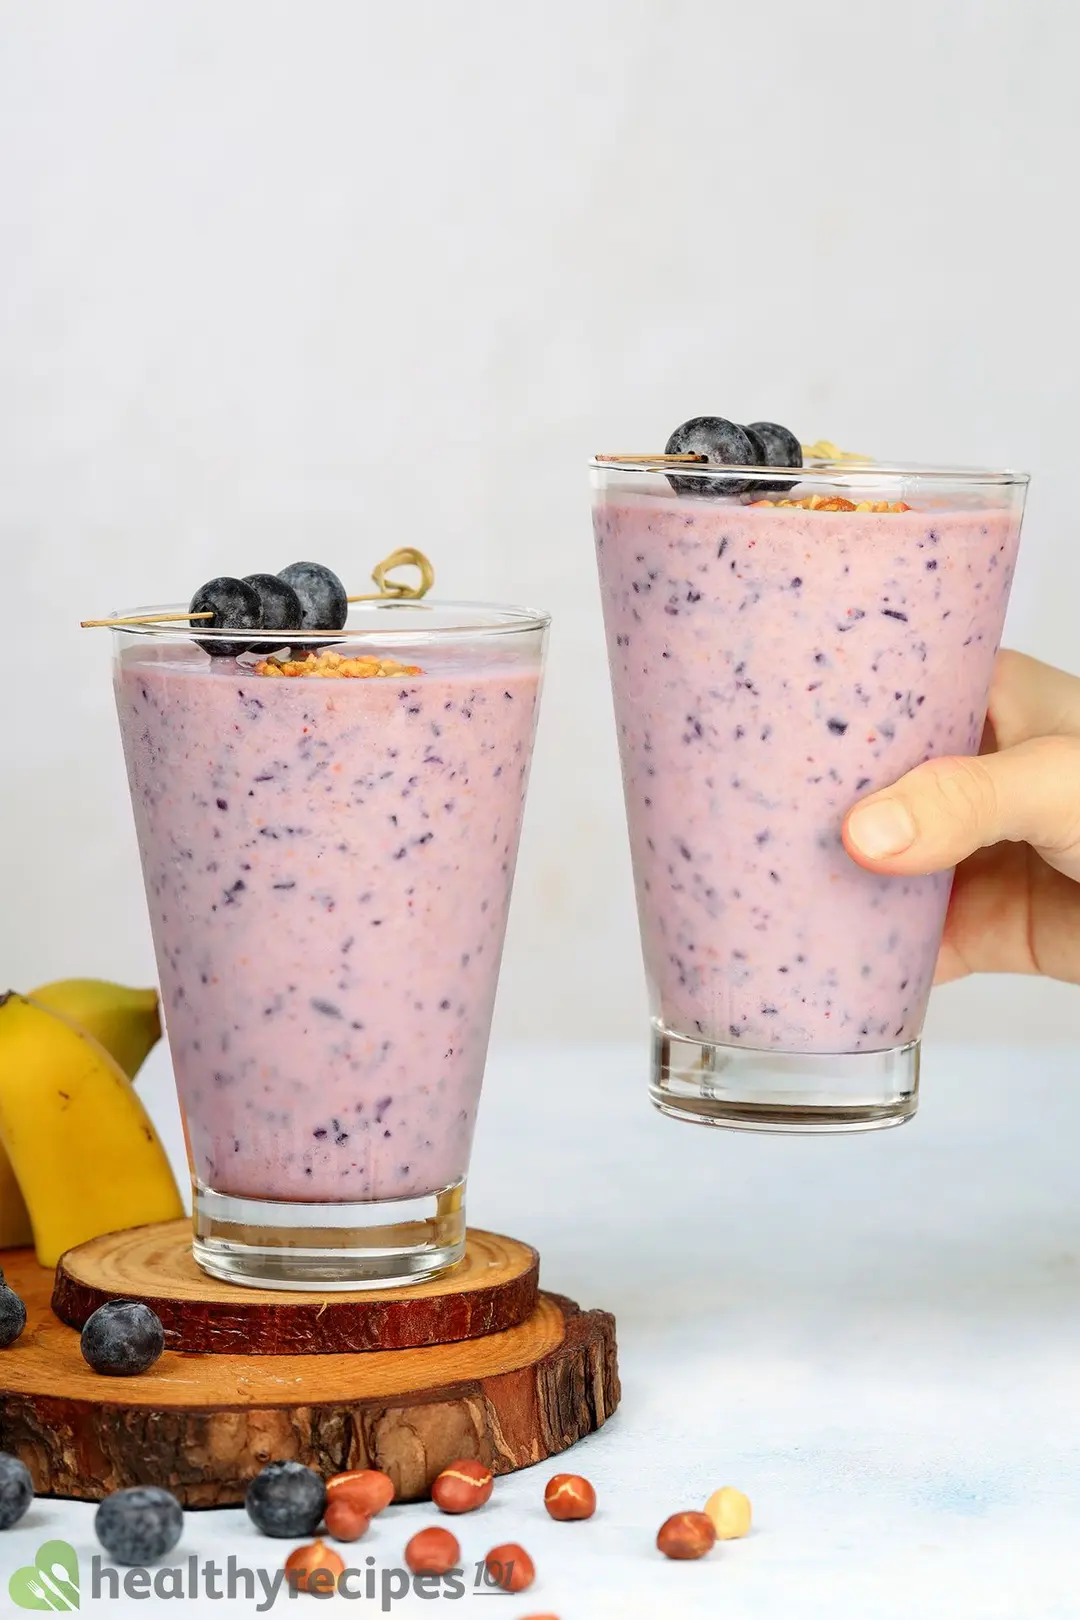 A glass of blueberry banana smoothie with crushed peanuts on two wooden coasters, with a blueberry smoothie about to be put next to it